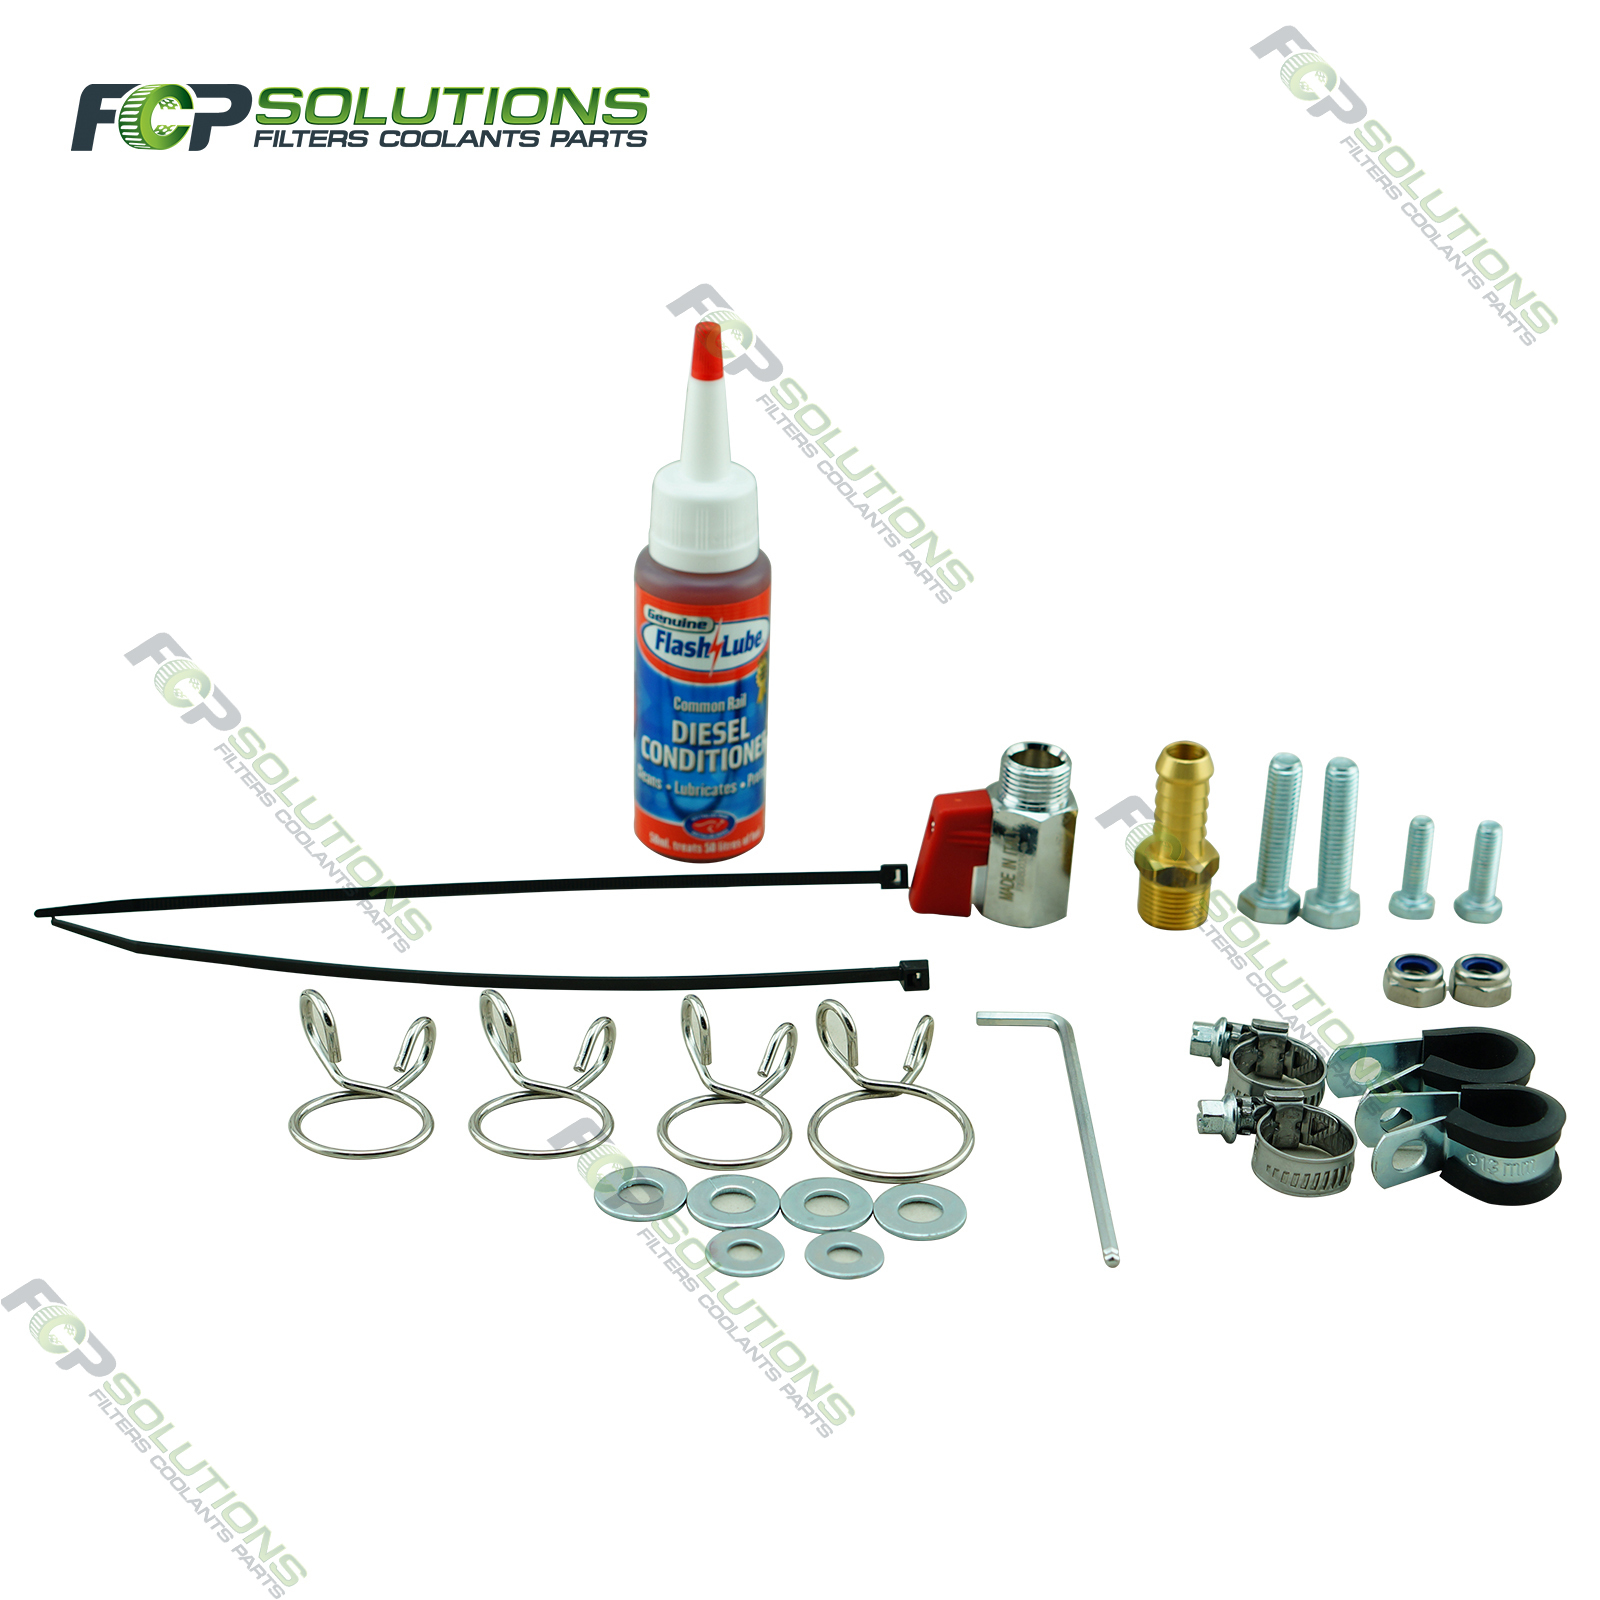 Flashlube Catch Can Pro Kit Mazda BT50 2.2L, 3.2L P4AT, P5AT 10/2011 - On